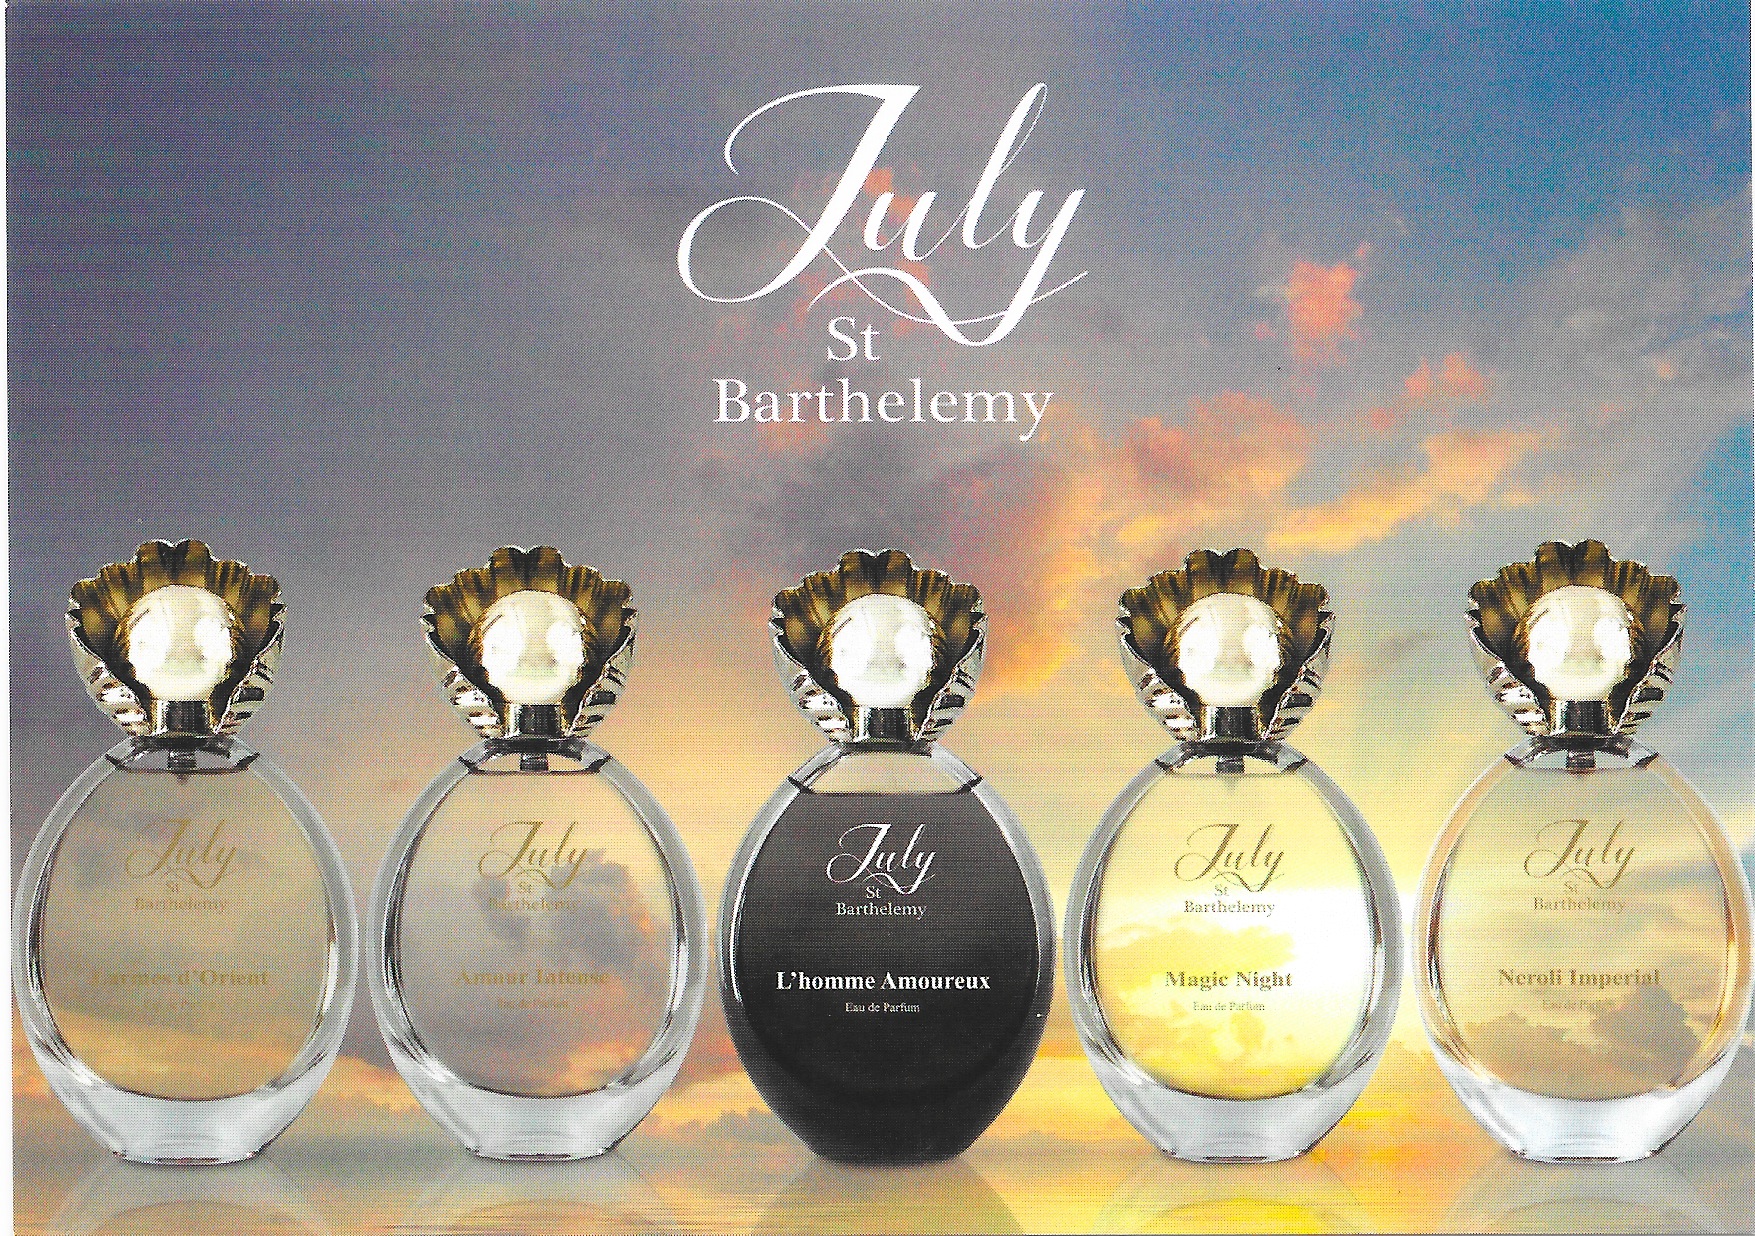 Les exclusifs July St Barthelemy carte postale